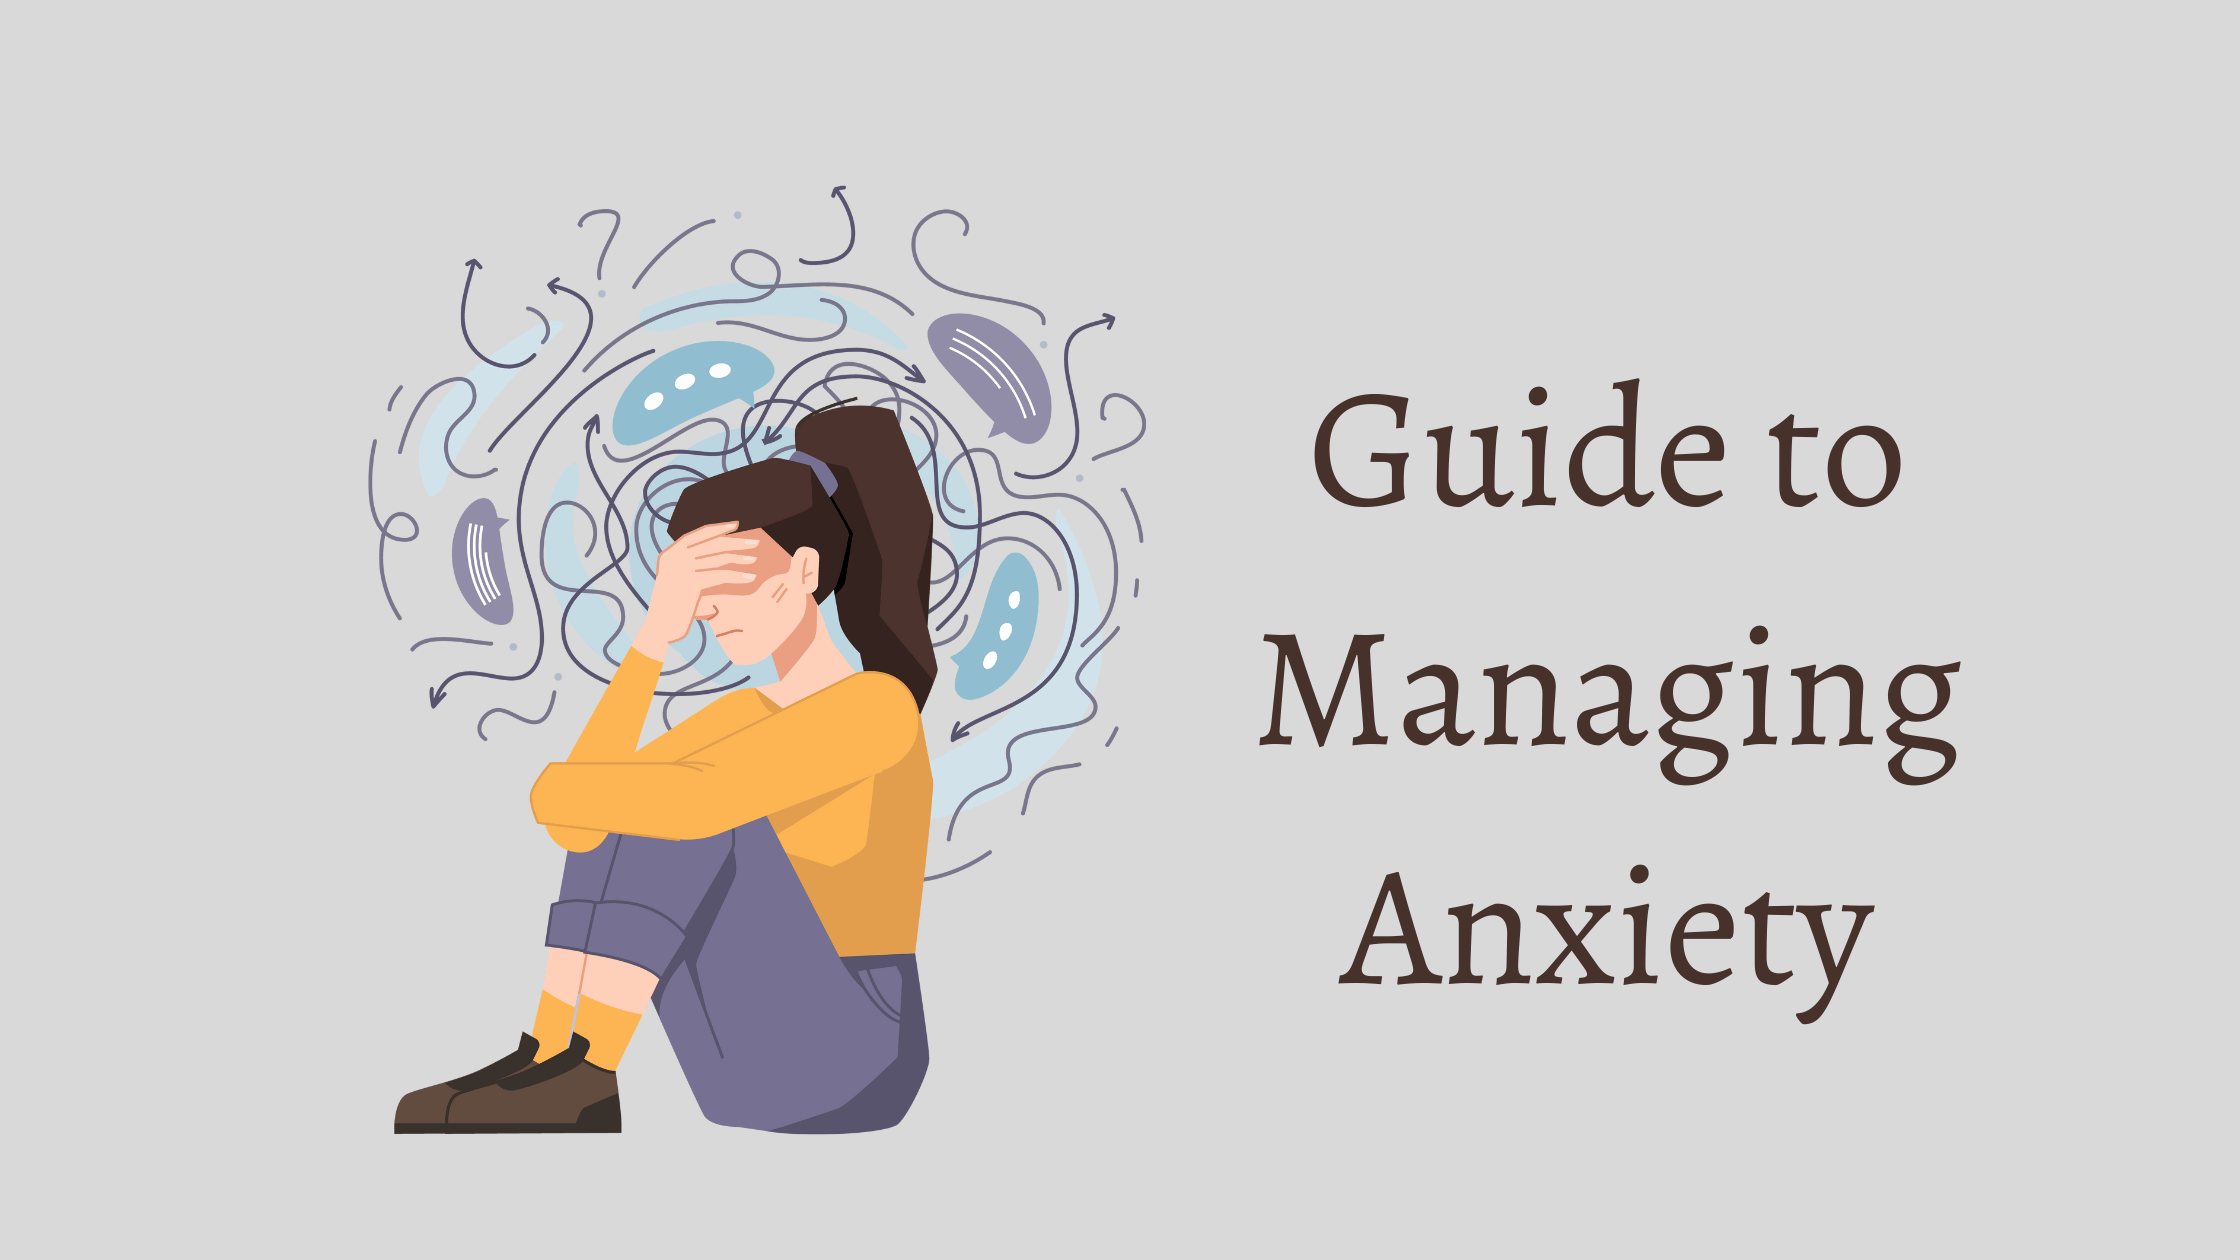 Guide to Managing Anxiety